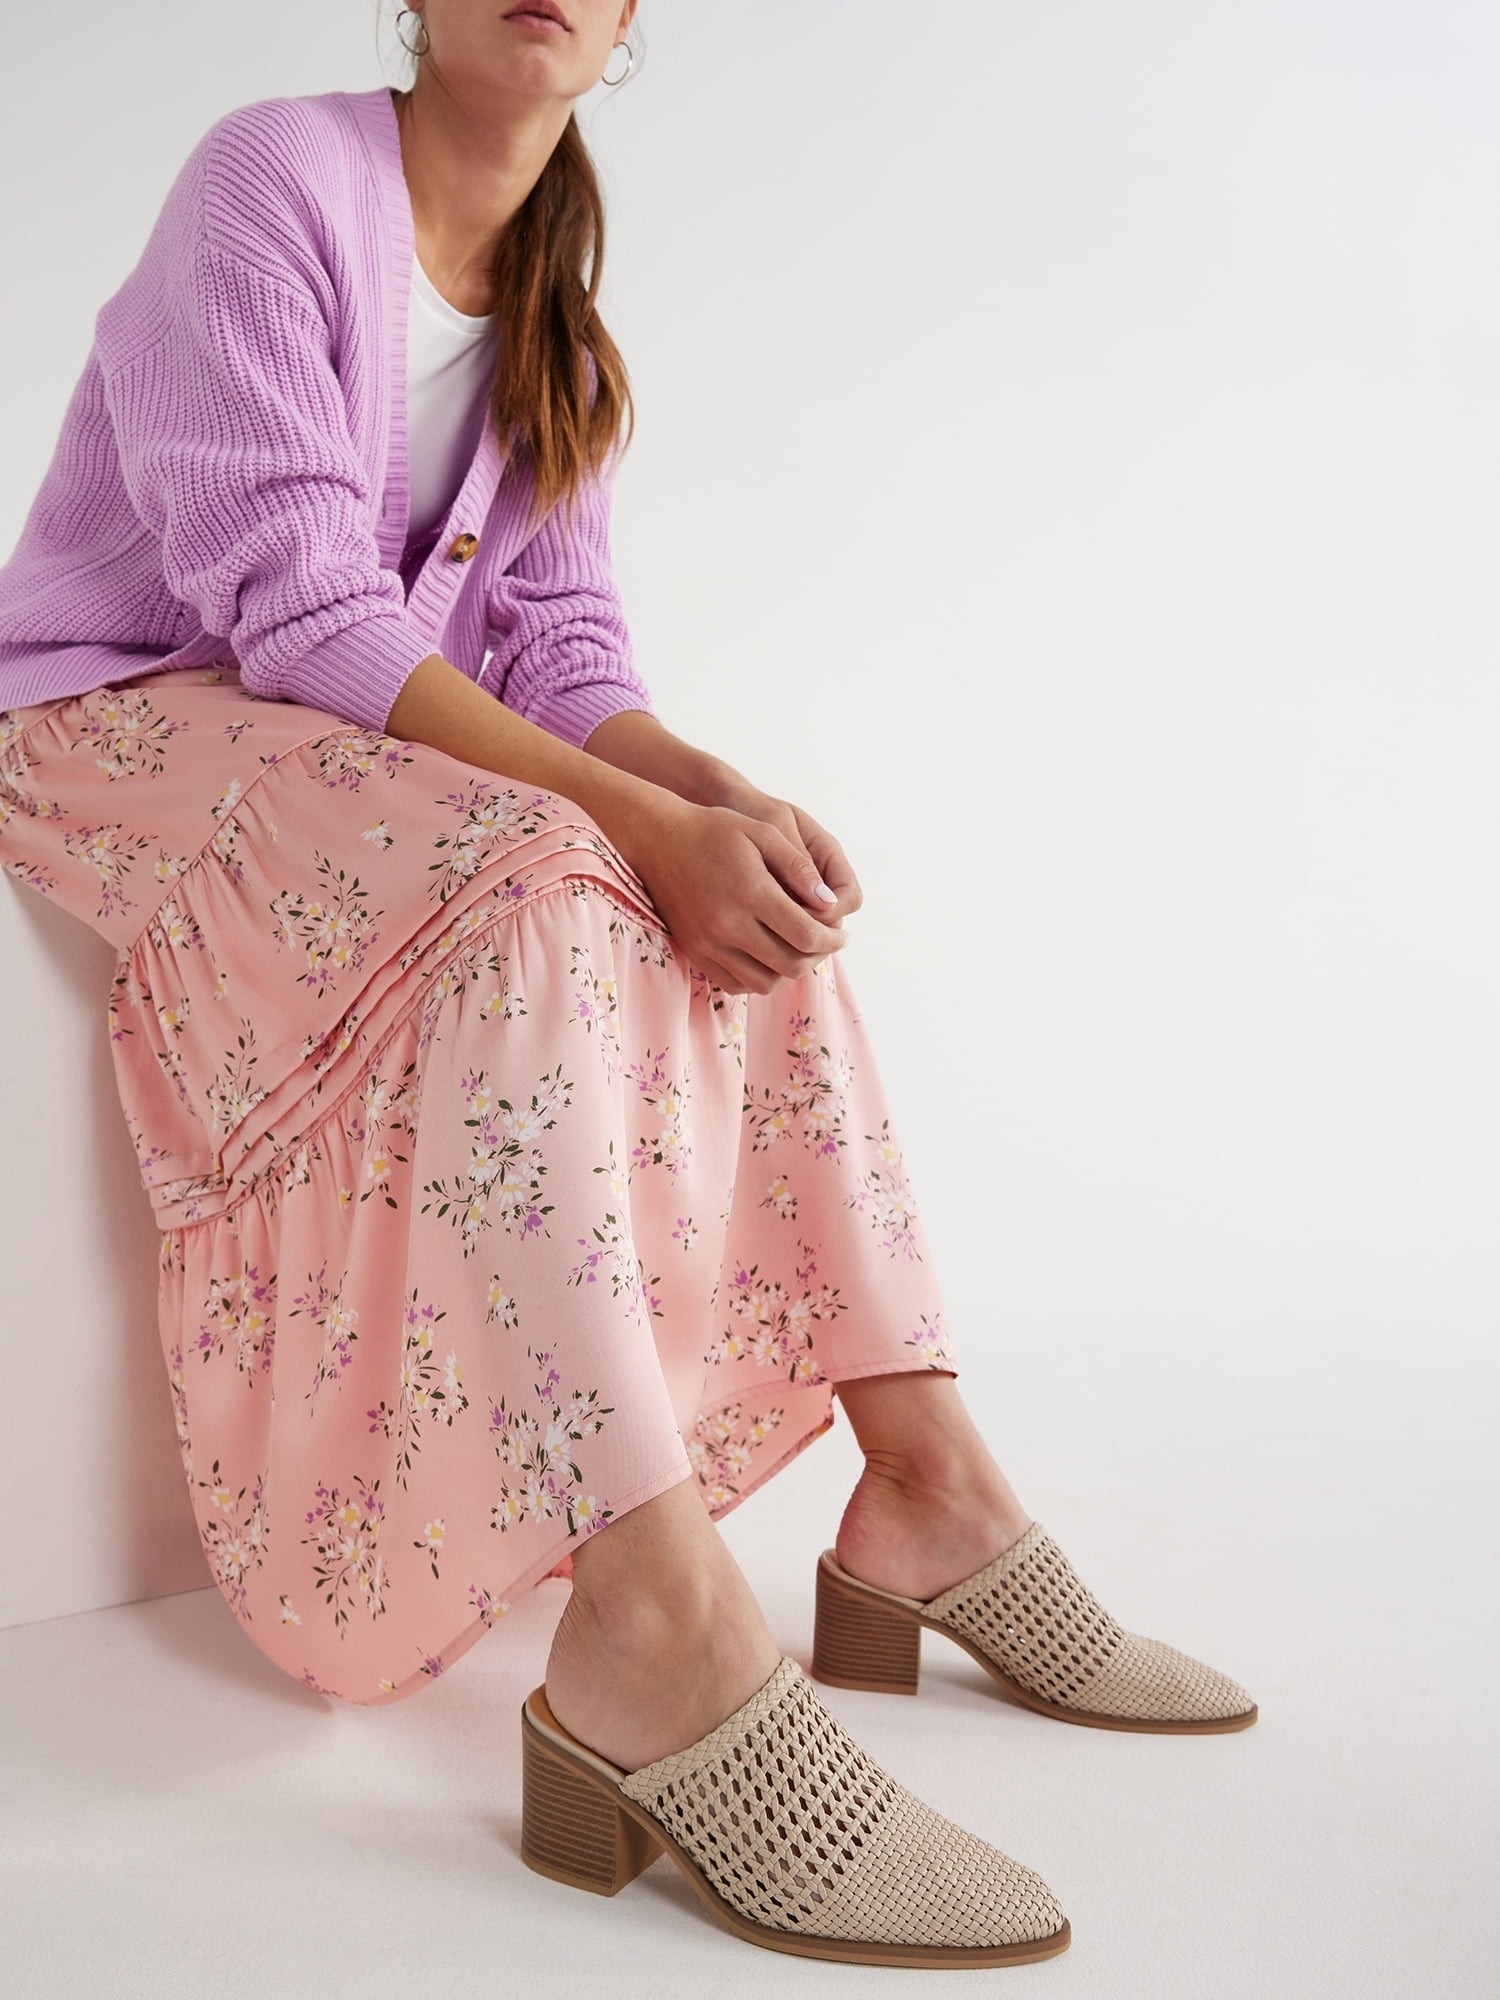 Person seated wearing a lavender cardigan, floral skirt and tan woven heeled shoes